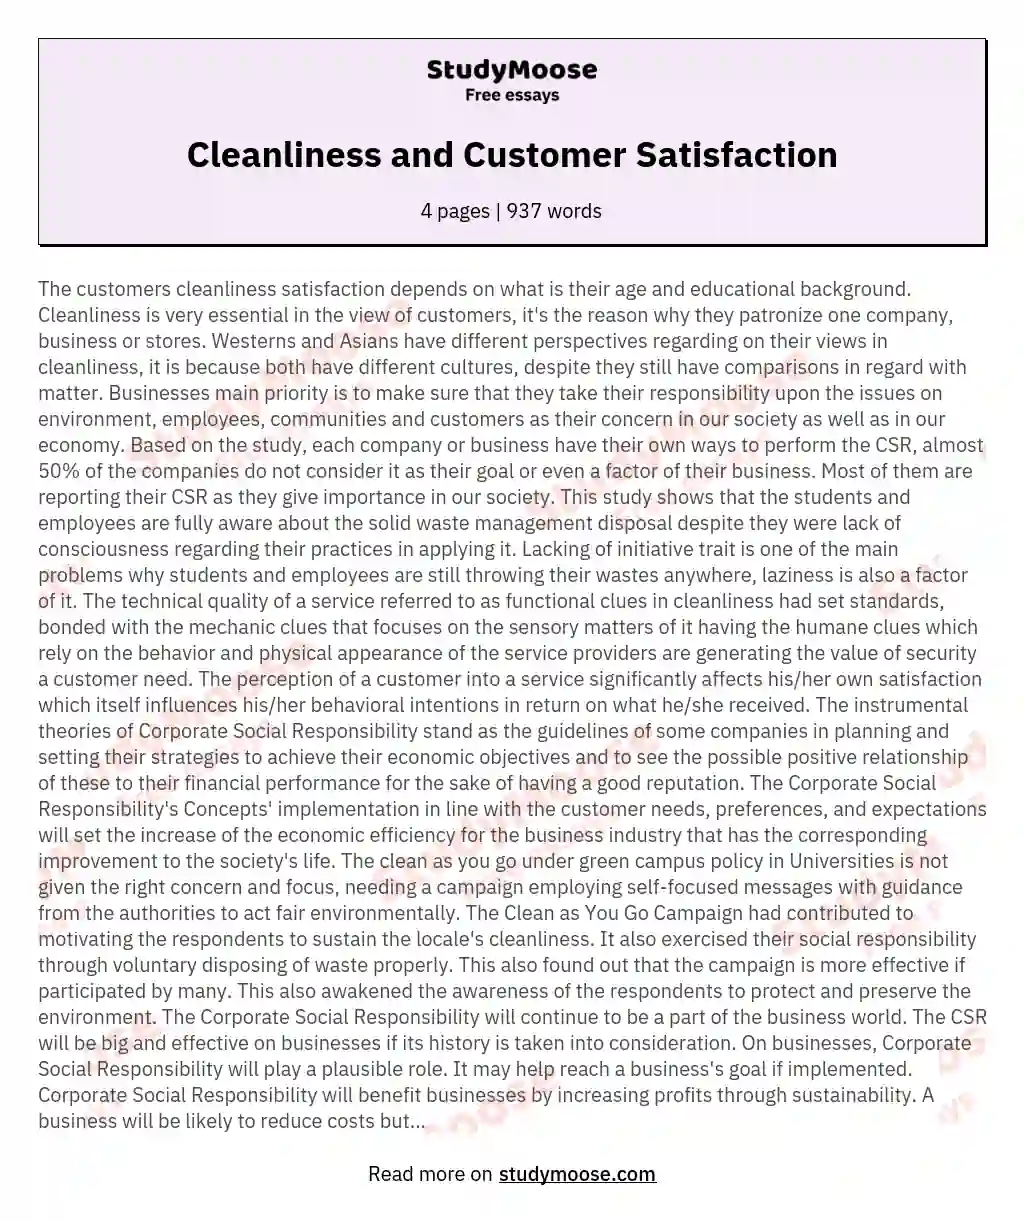 Cleanliness and Customer Satisfaction essay